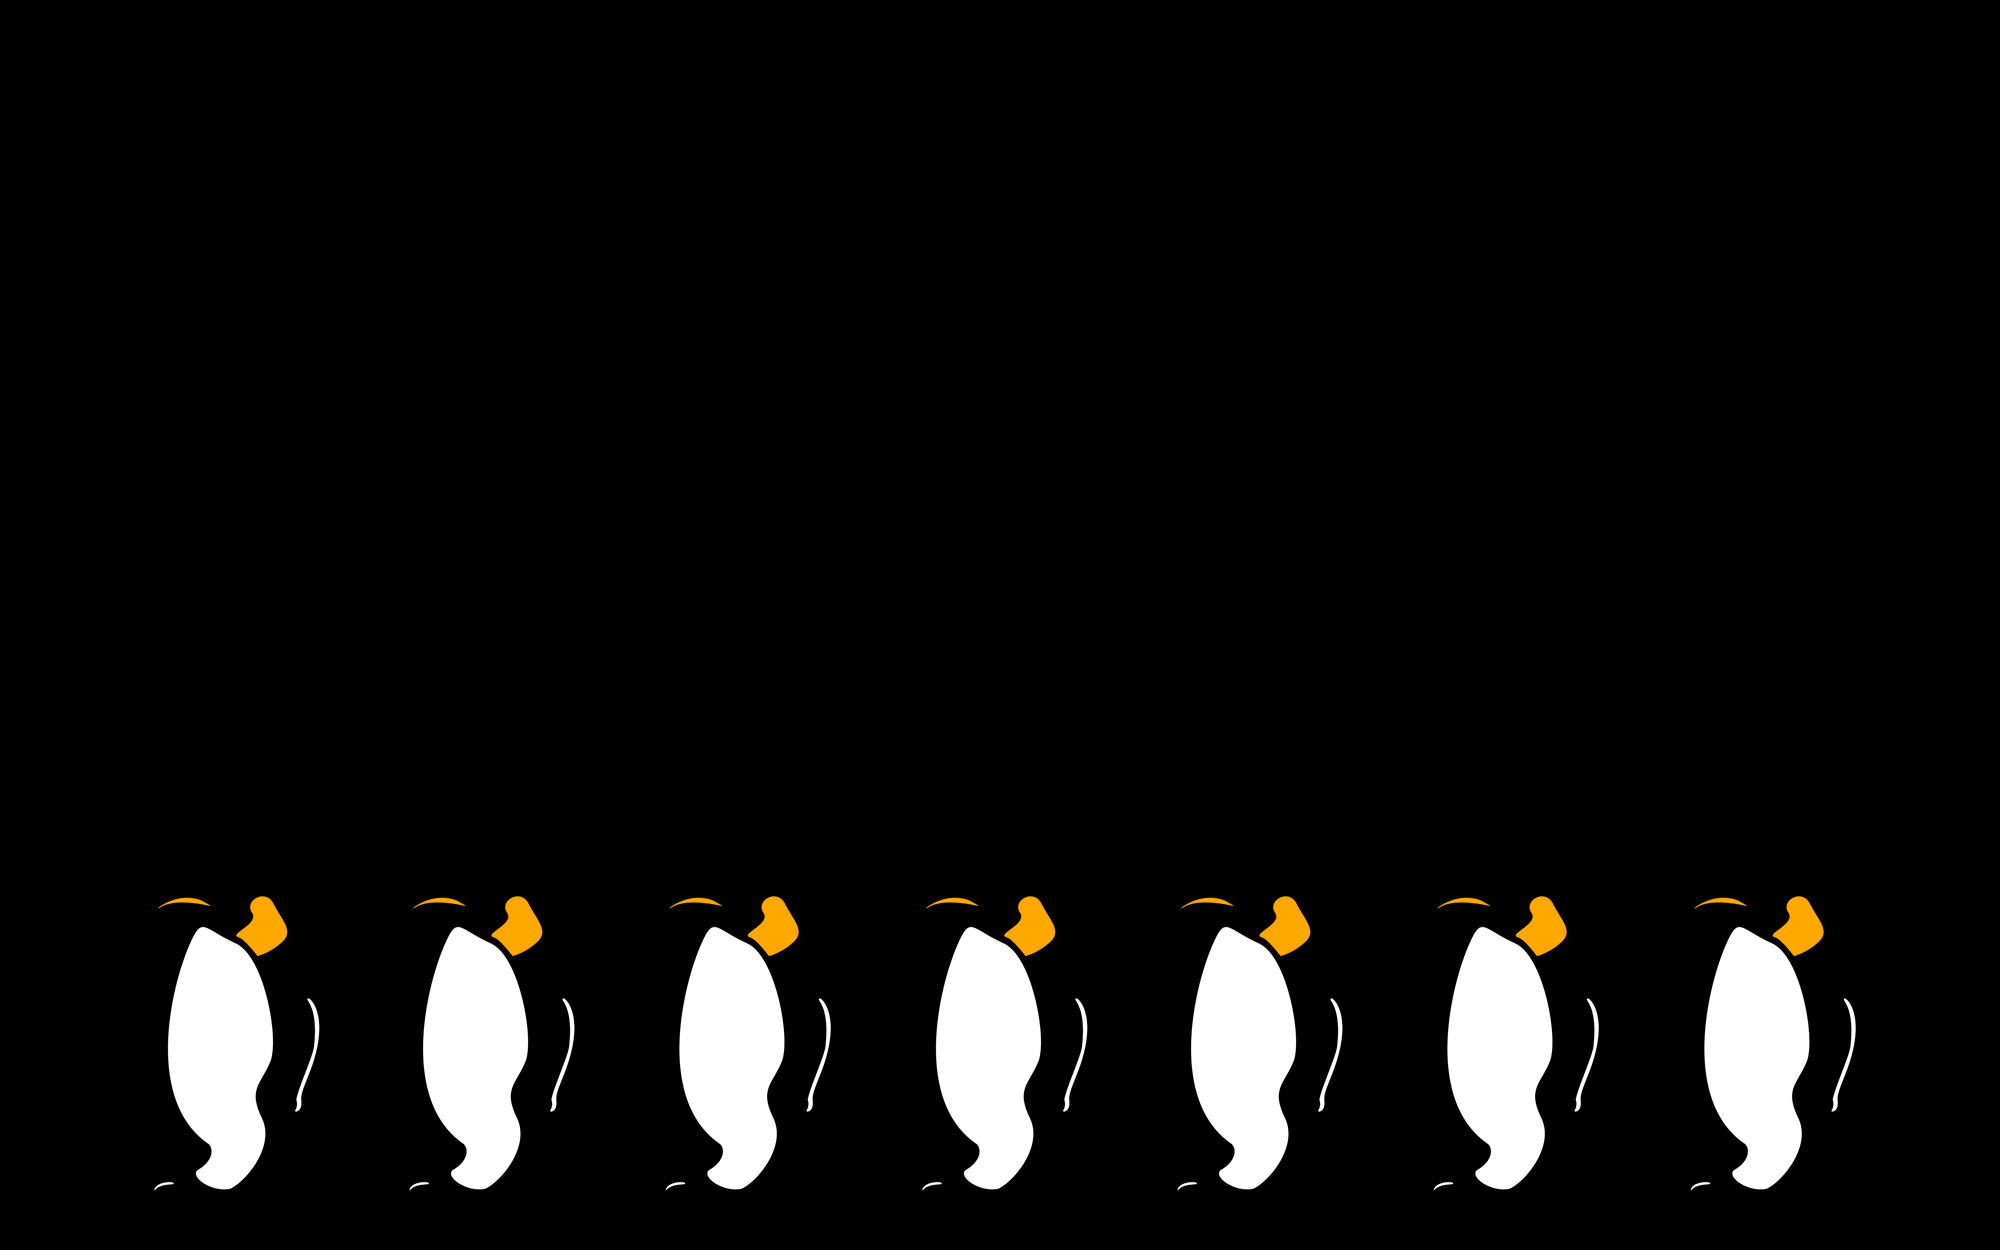 2000x1250 Minimalist Penguin Wallpaper by Fritters Minimalist Penguin Wallpaper by  Fritters